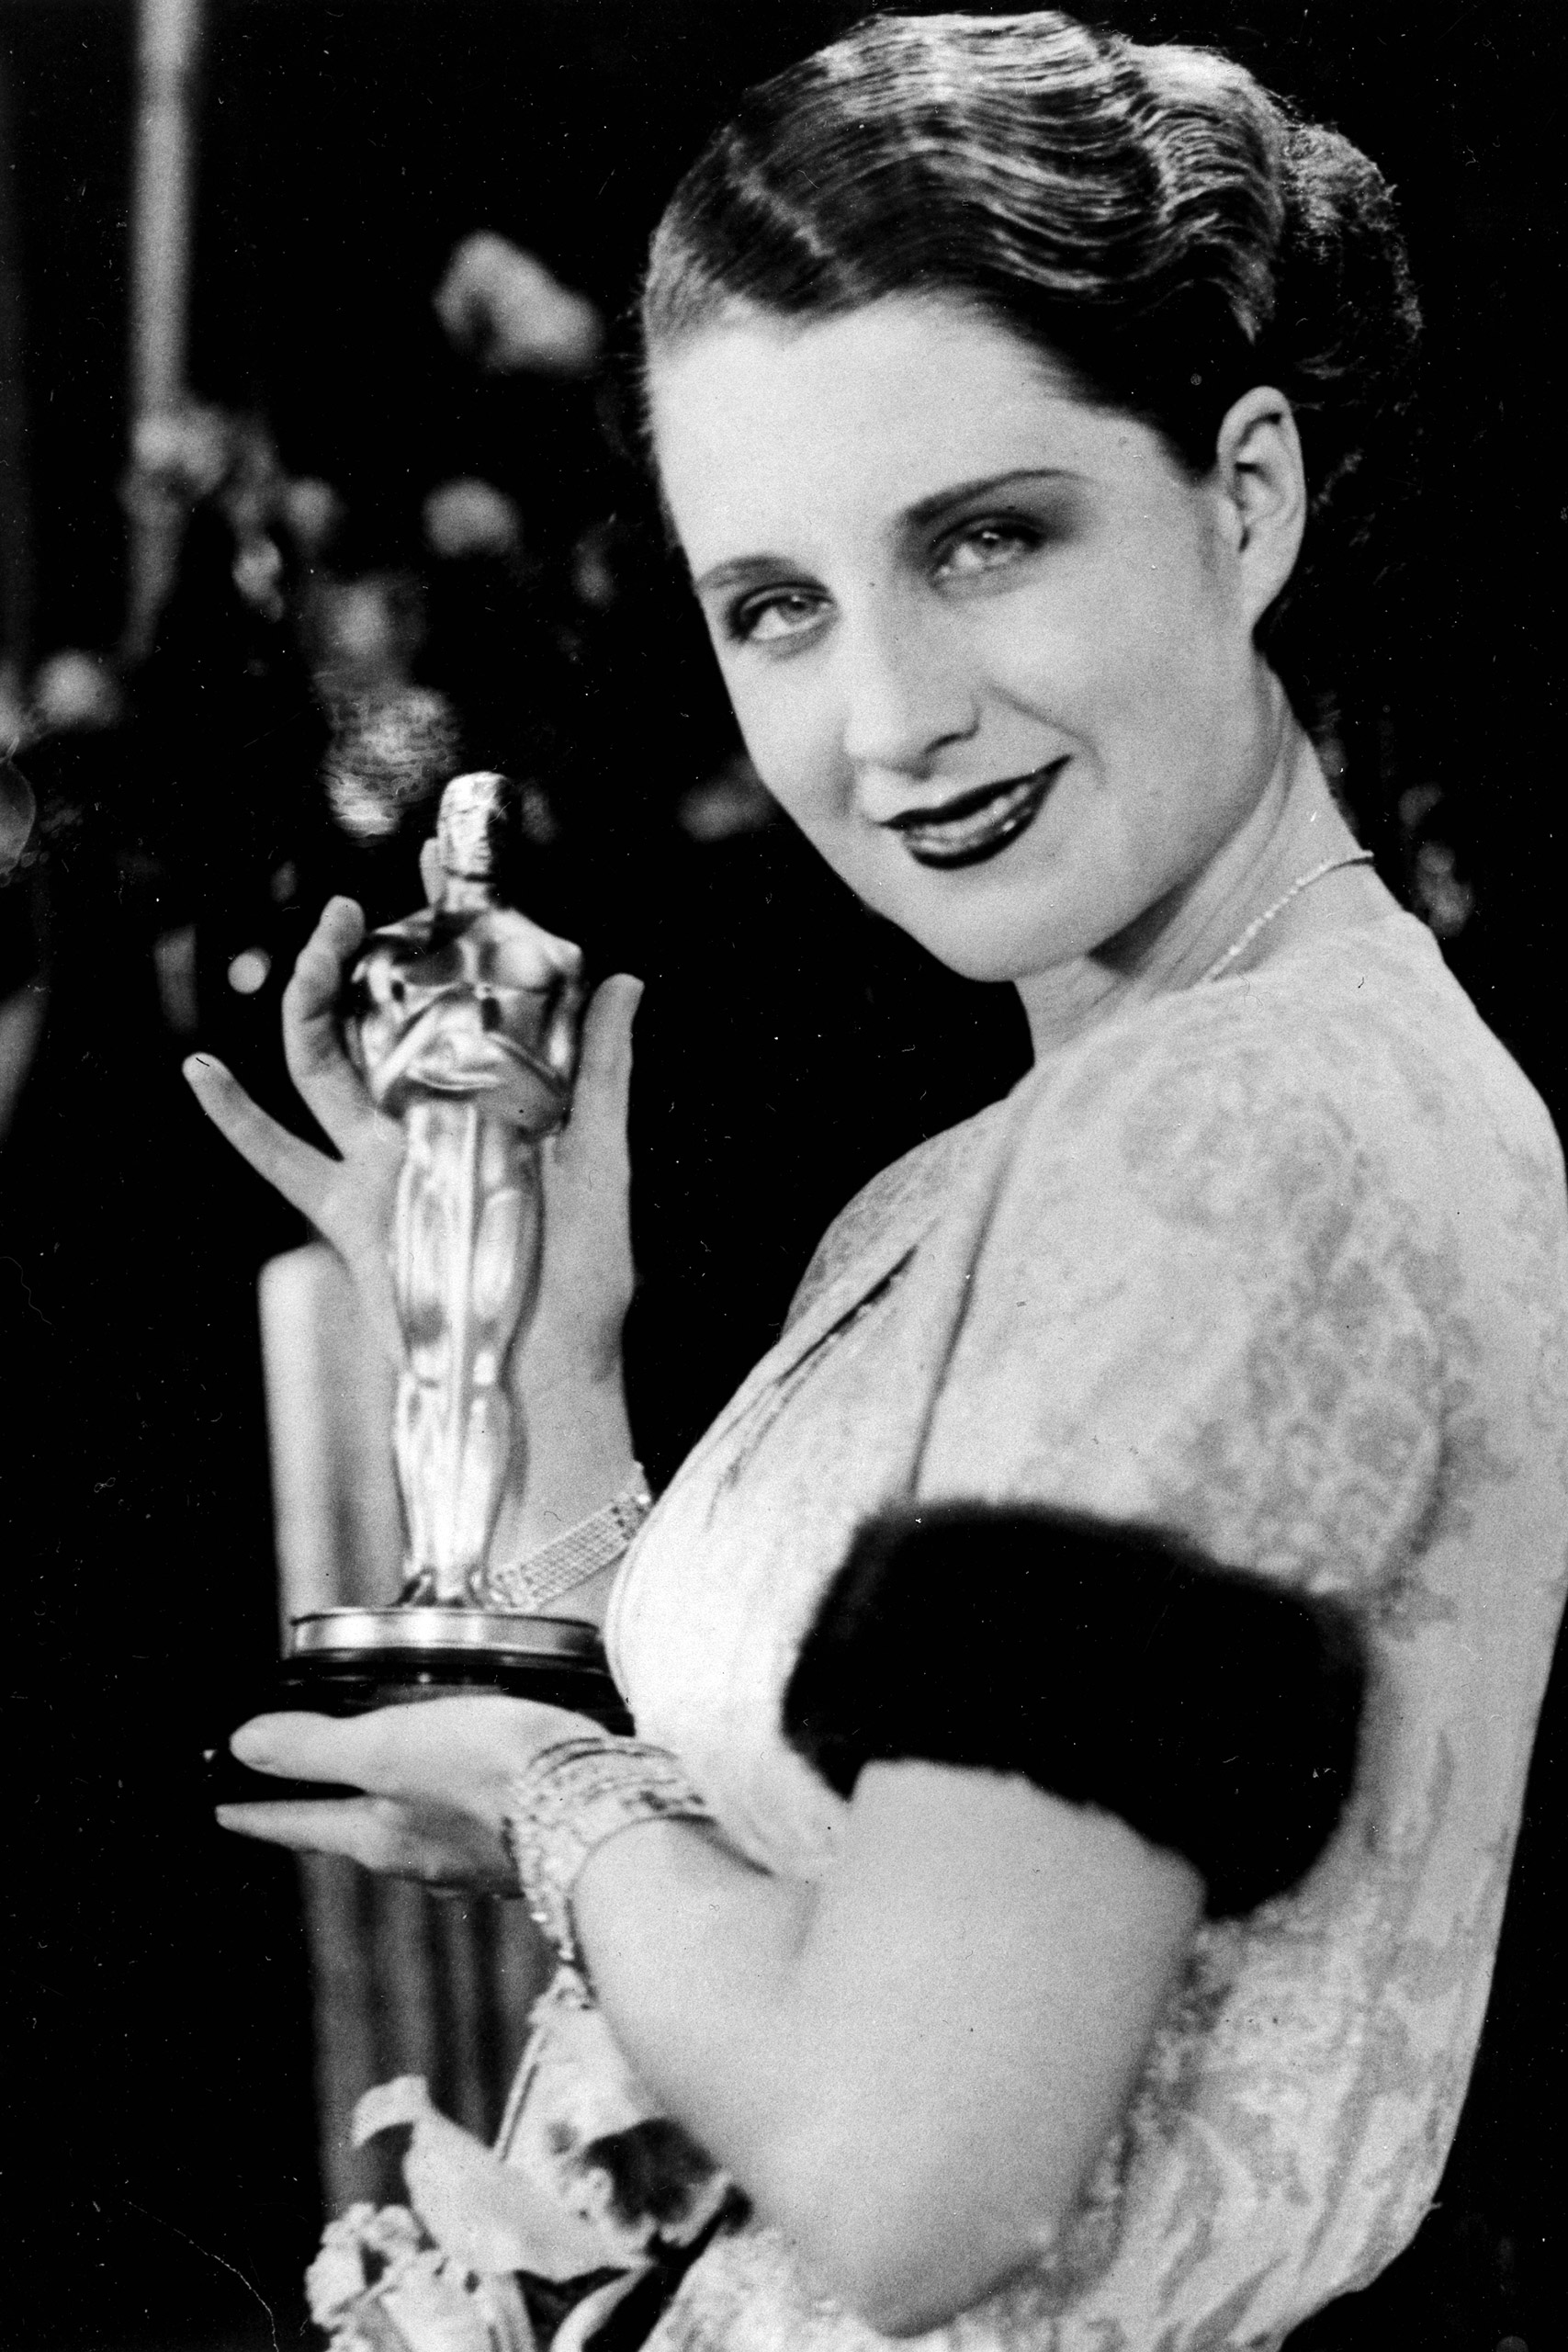 Norma Shearer poses with her Oscar at the Academy Awards banquet in 1930.